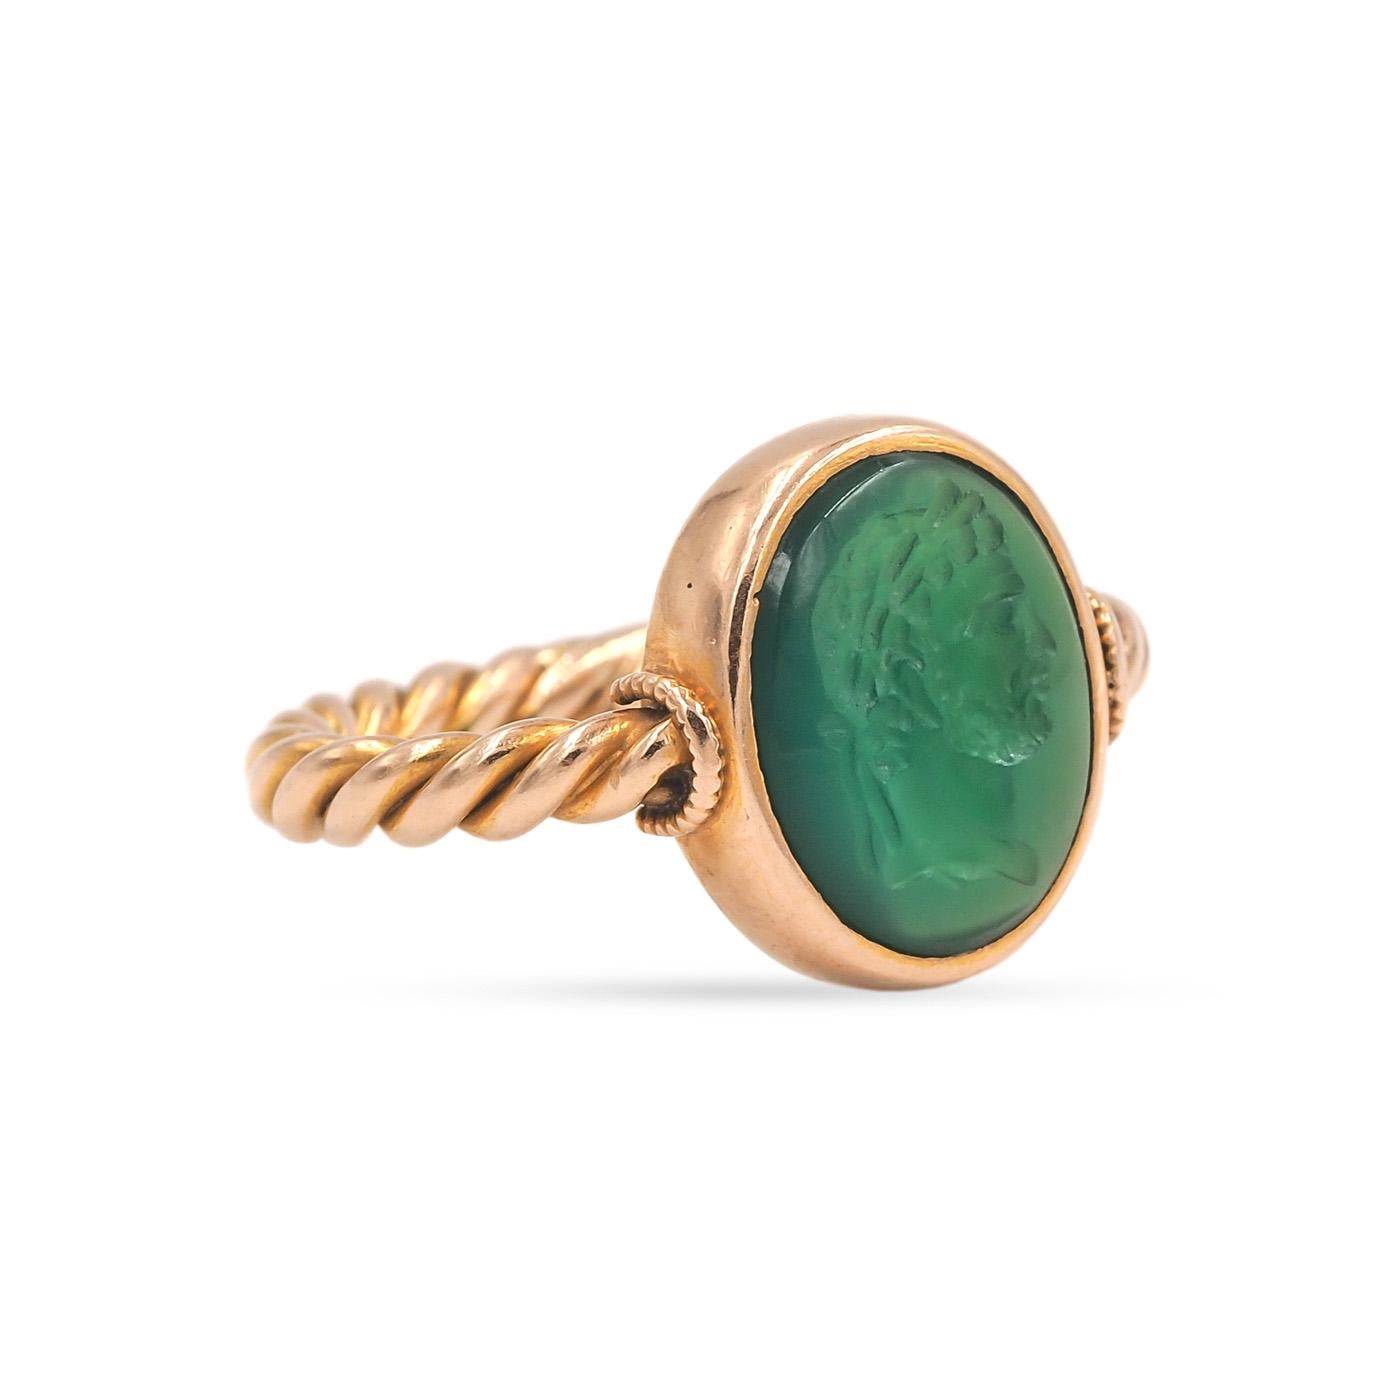 Late Victorian era Carved Chalcedony Intaglio Gold Ring composed of 18k yellow gold. With a bezel-set oval natural green Chrysoprase Chalcedony cabochon that has been carved to depict a man's profile. With a twisted rope gold shank. Center bezeled